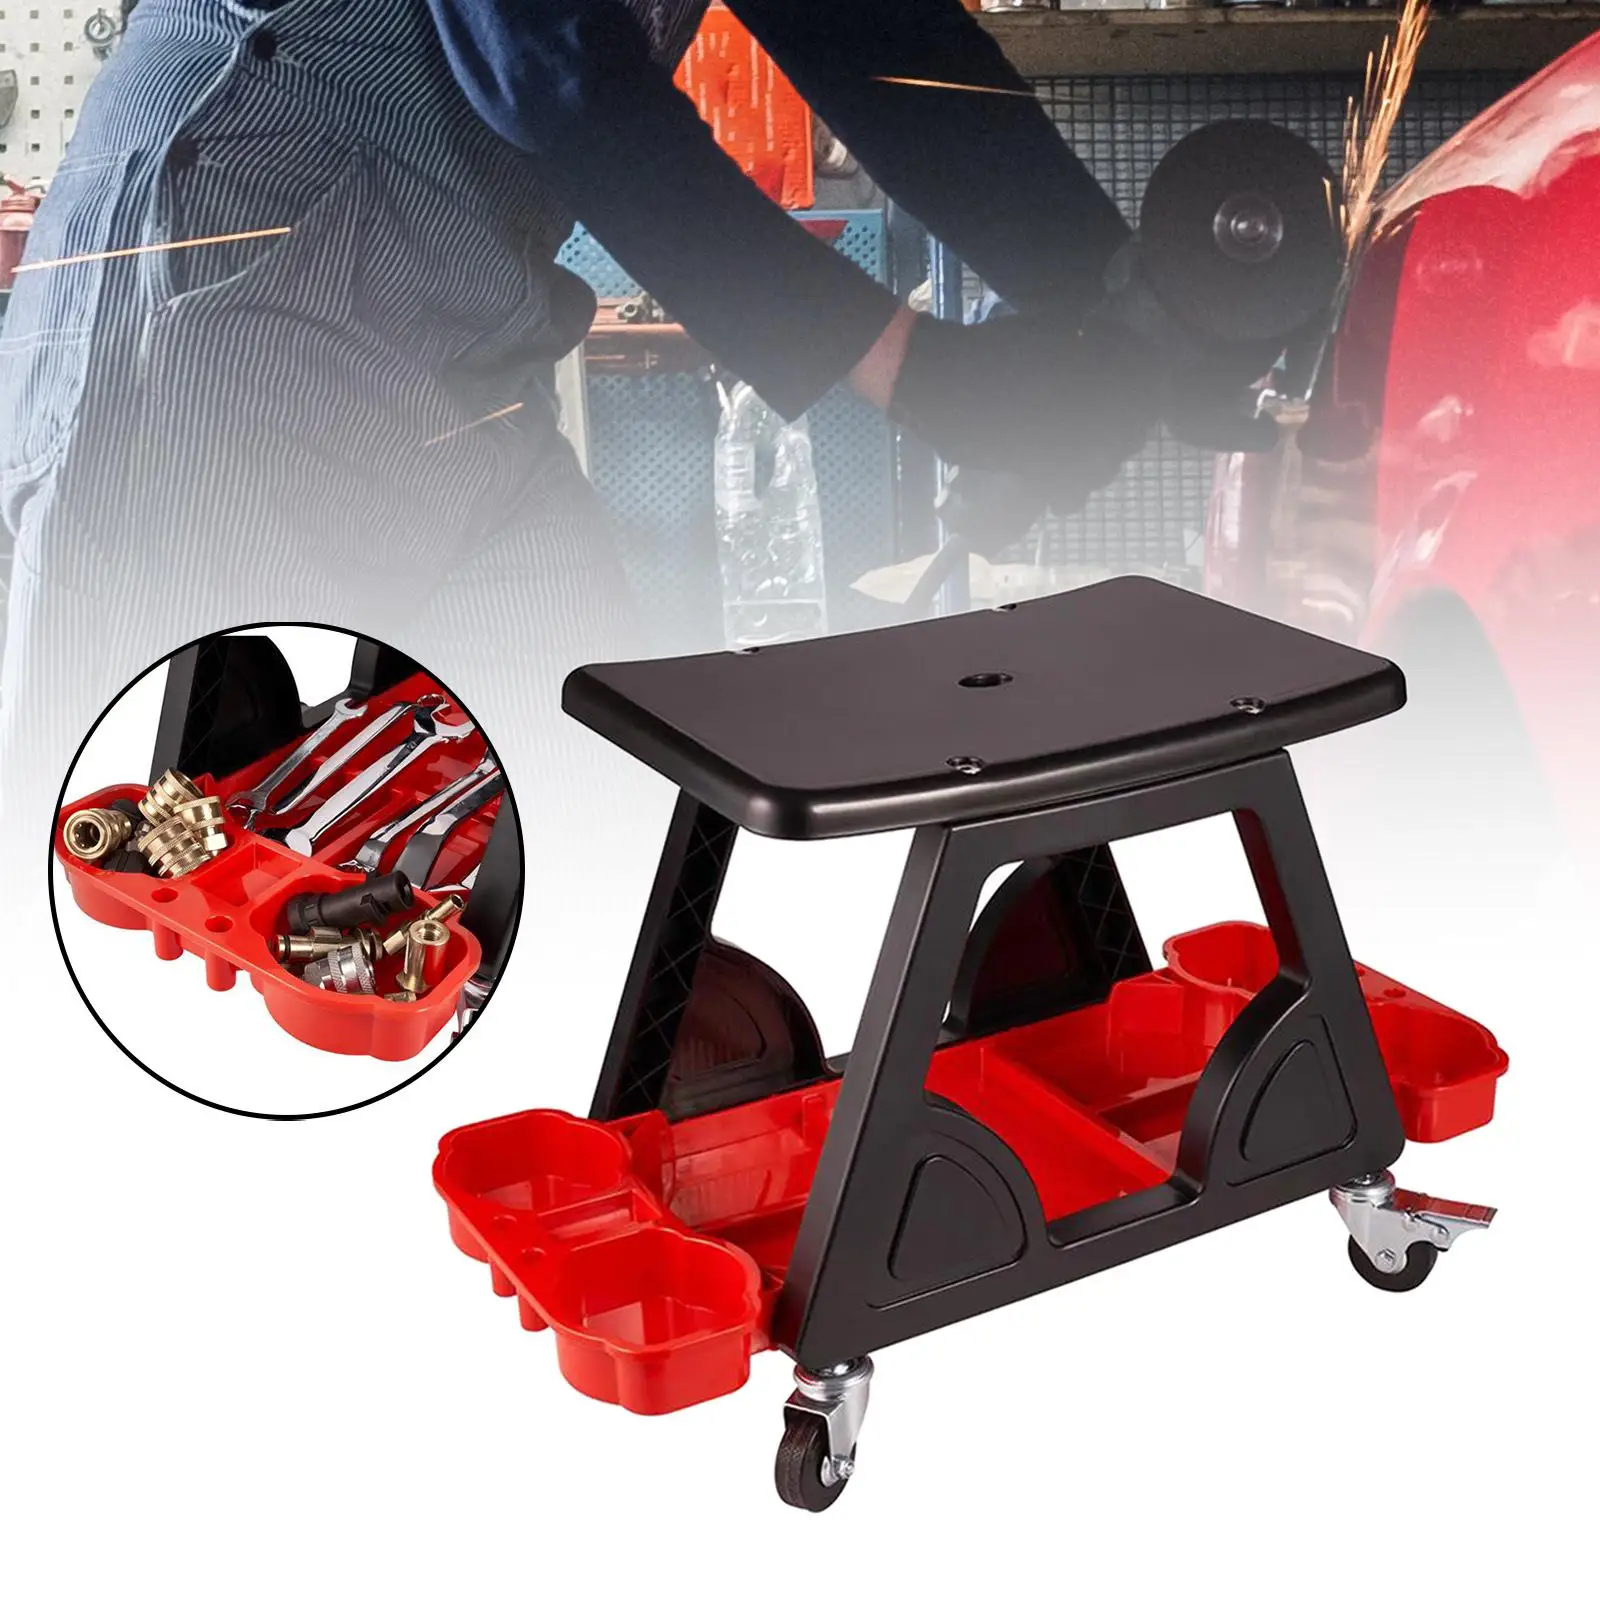 Garage Shop Stool Creeper Car Cleaning with Storage Tray Holder Roller Seat